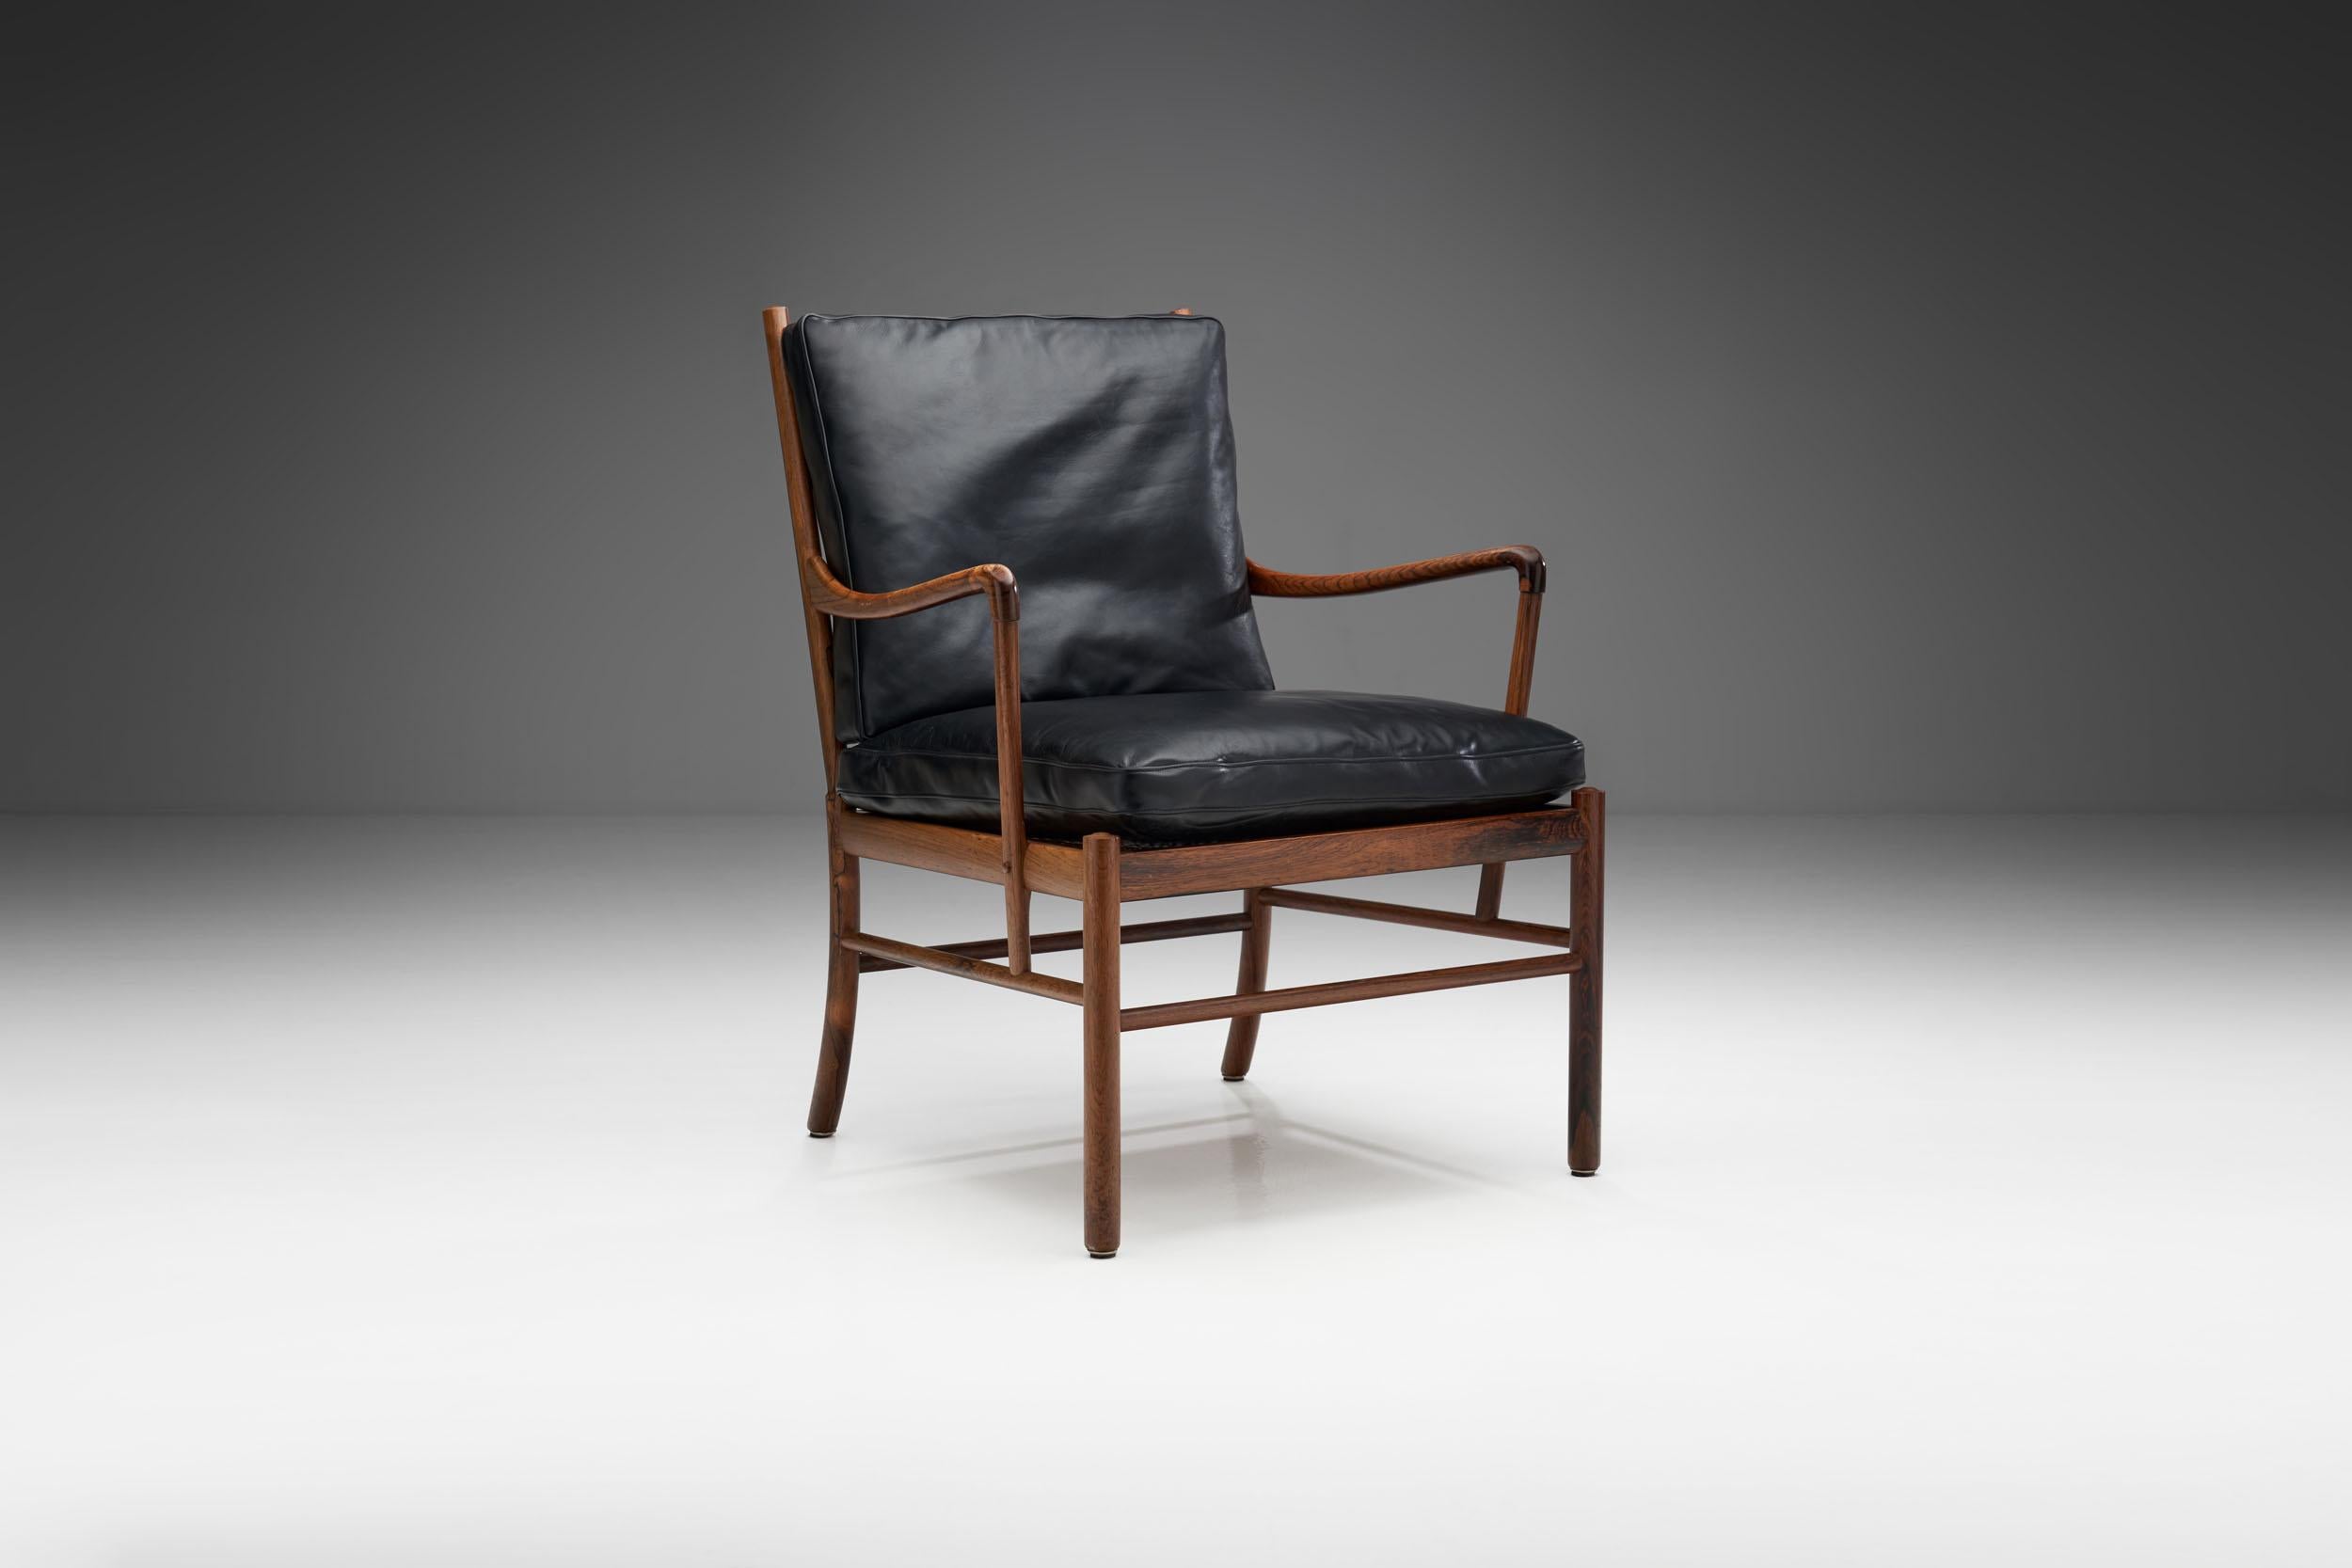 The Colonial chair is one of Danish designer, Ole Wanscher’s key designs, drawing influence from British and French colonial furniture from the 18th & 19th centuries. Wanscher disagreed with the modernist full-sail rejection of the past and